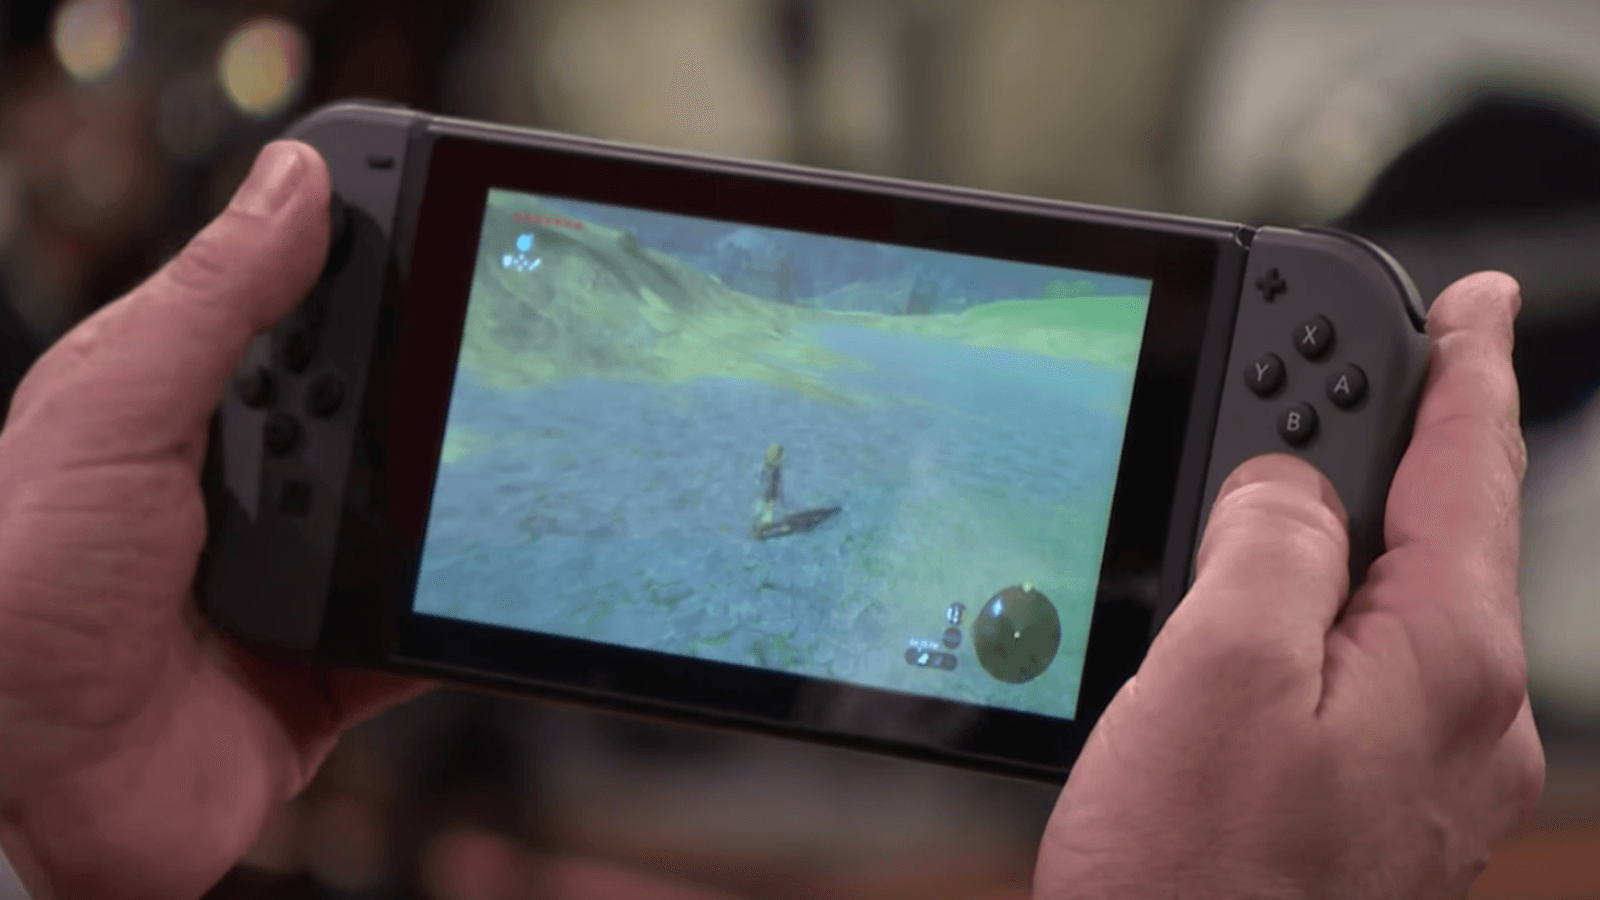 Gamer claims he found a tumor in his hand thanks to the Switch's HD Rumble